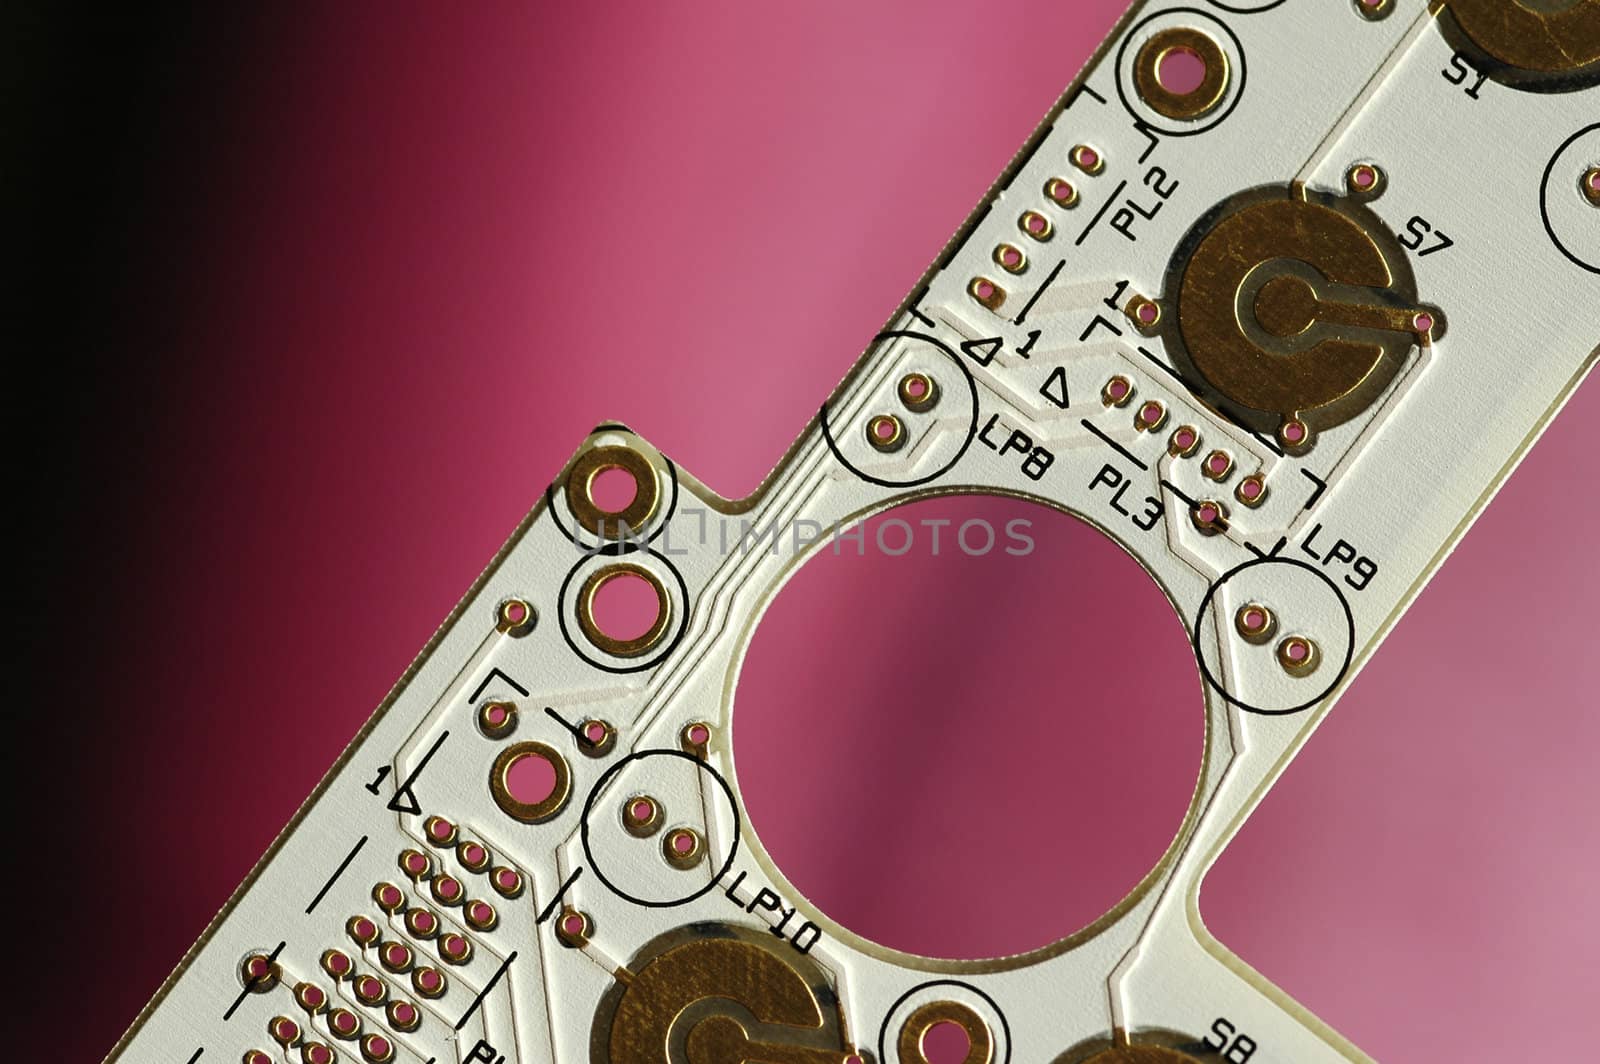 computer circuitboard prior to component loading